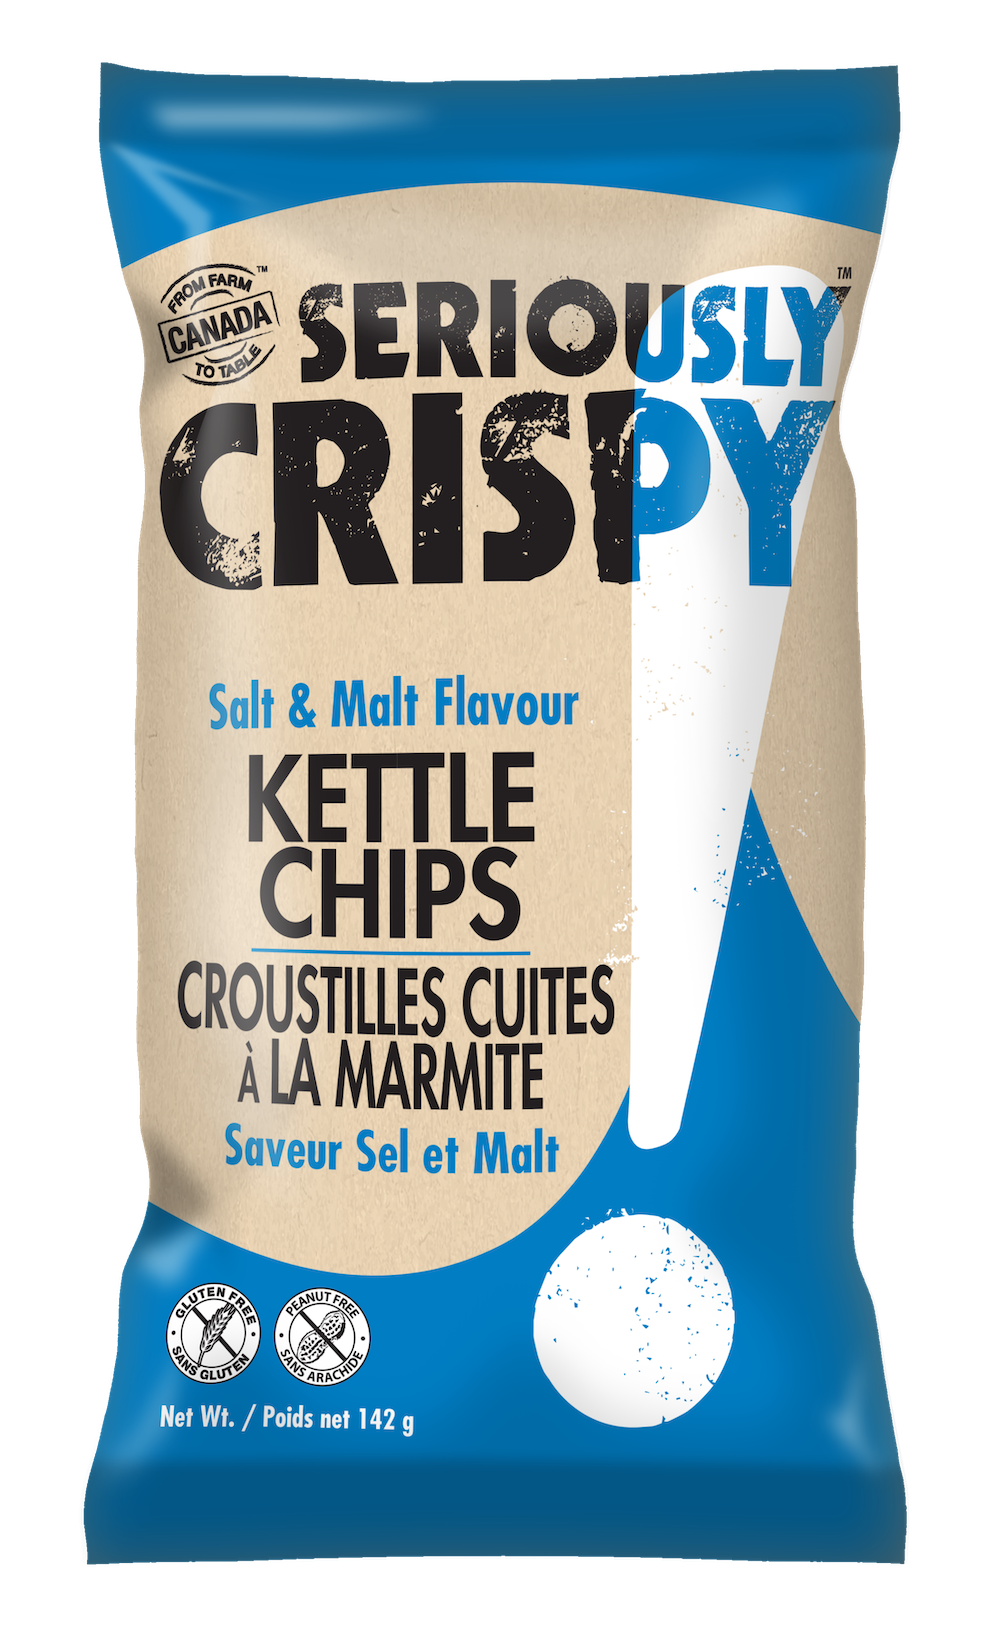 A photo of a bag of Seriously Crispy Salt and Malt chips